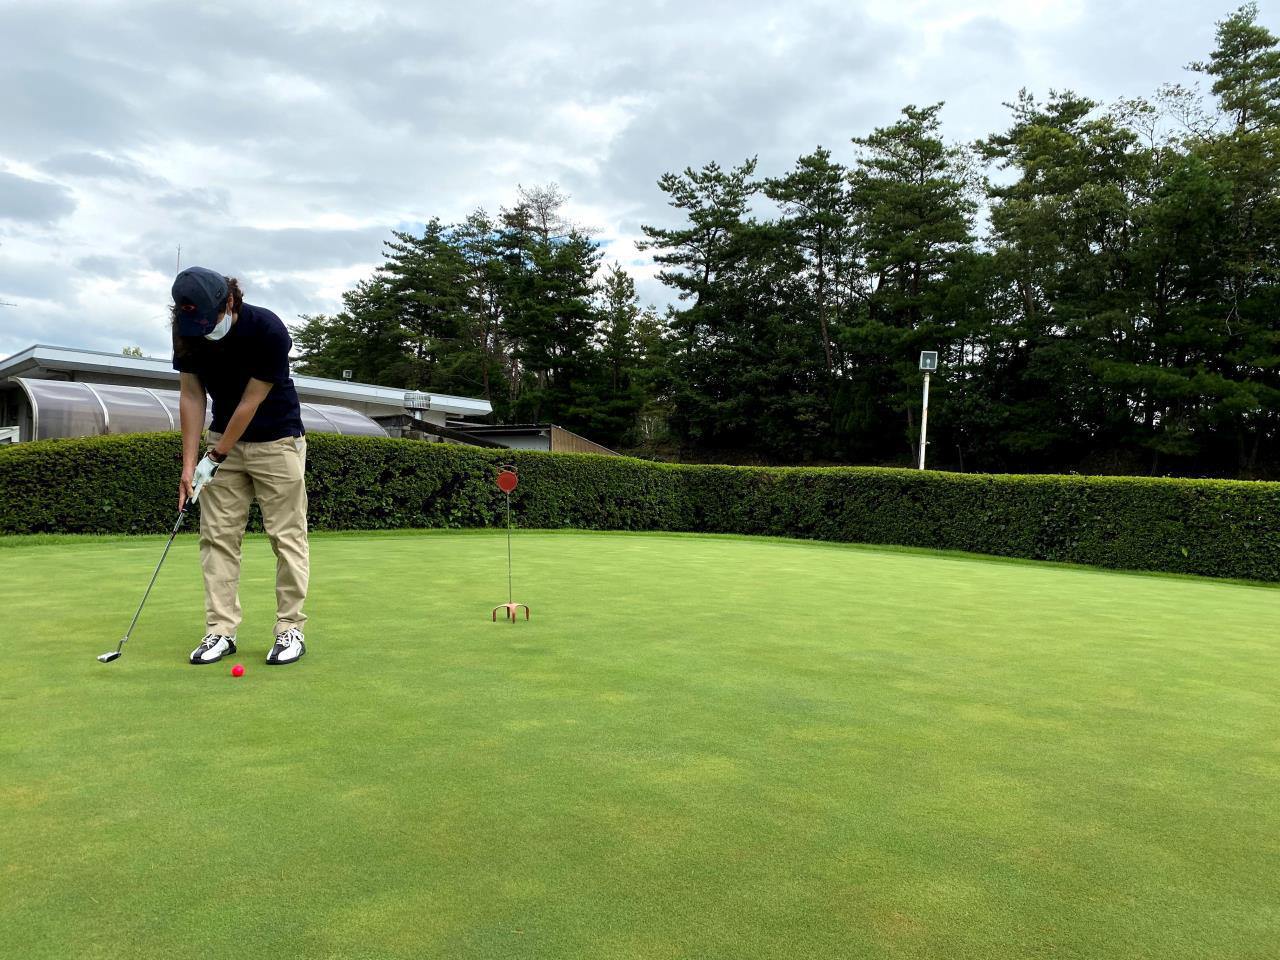 A Golfing Holiday in Hyogo—The Birthplace of Golf in Japan